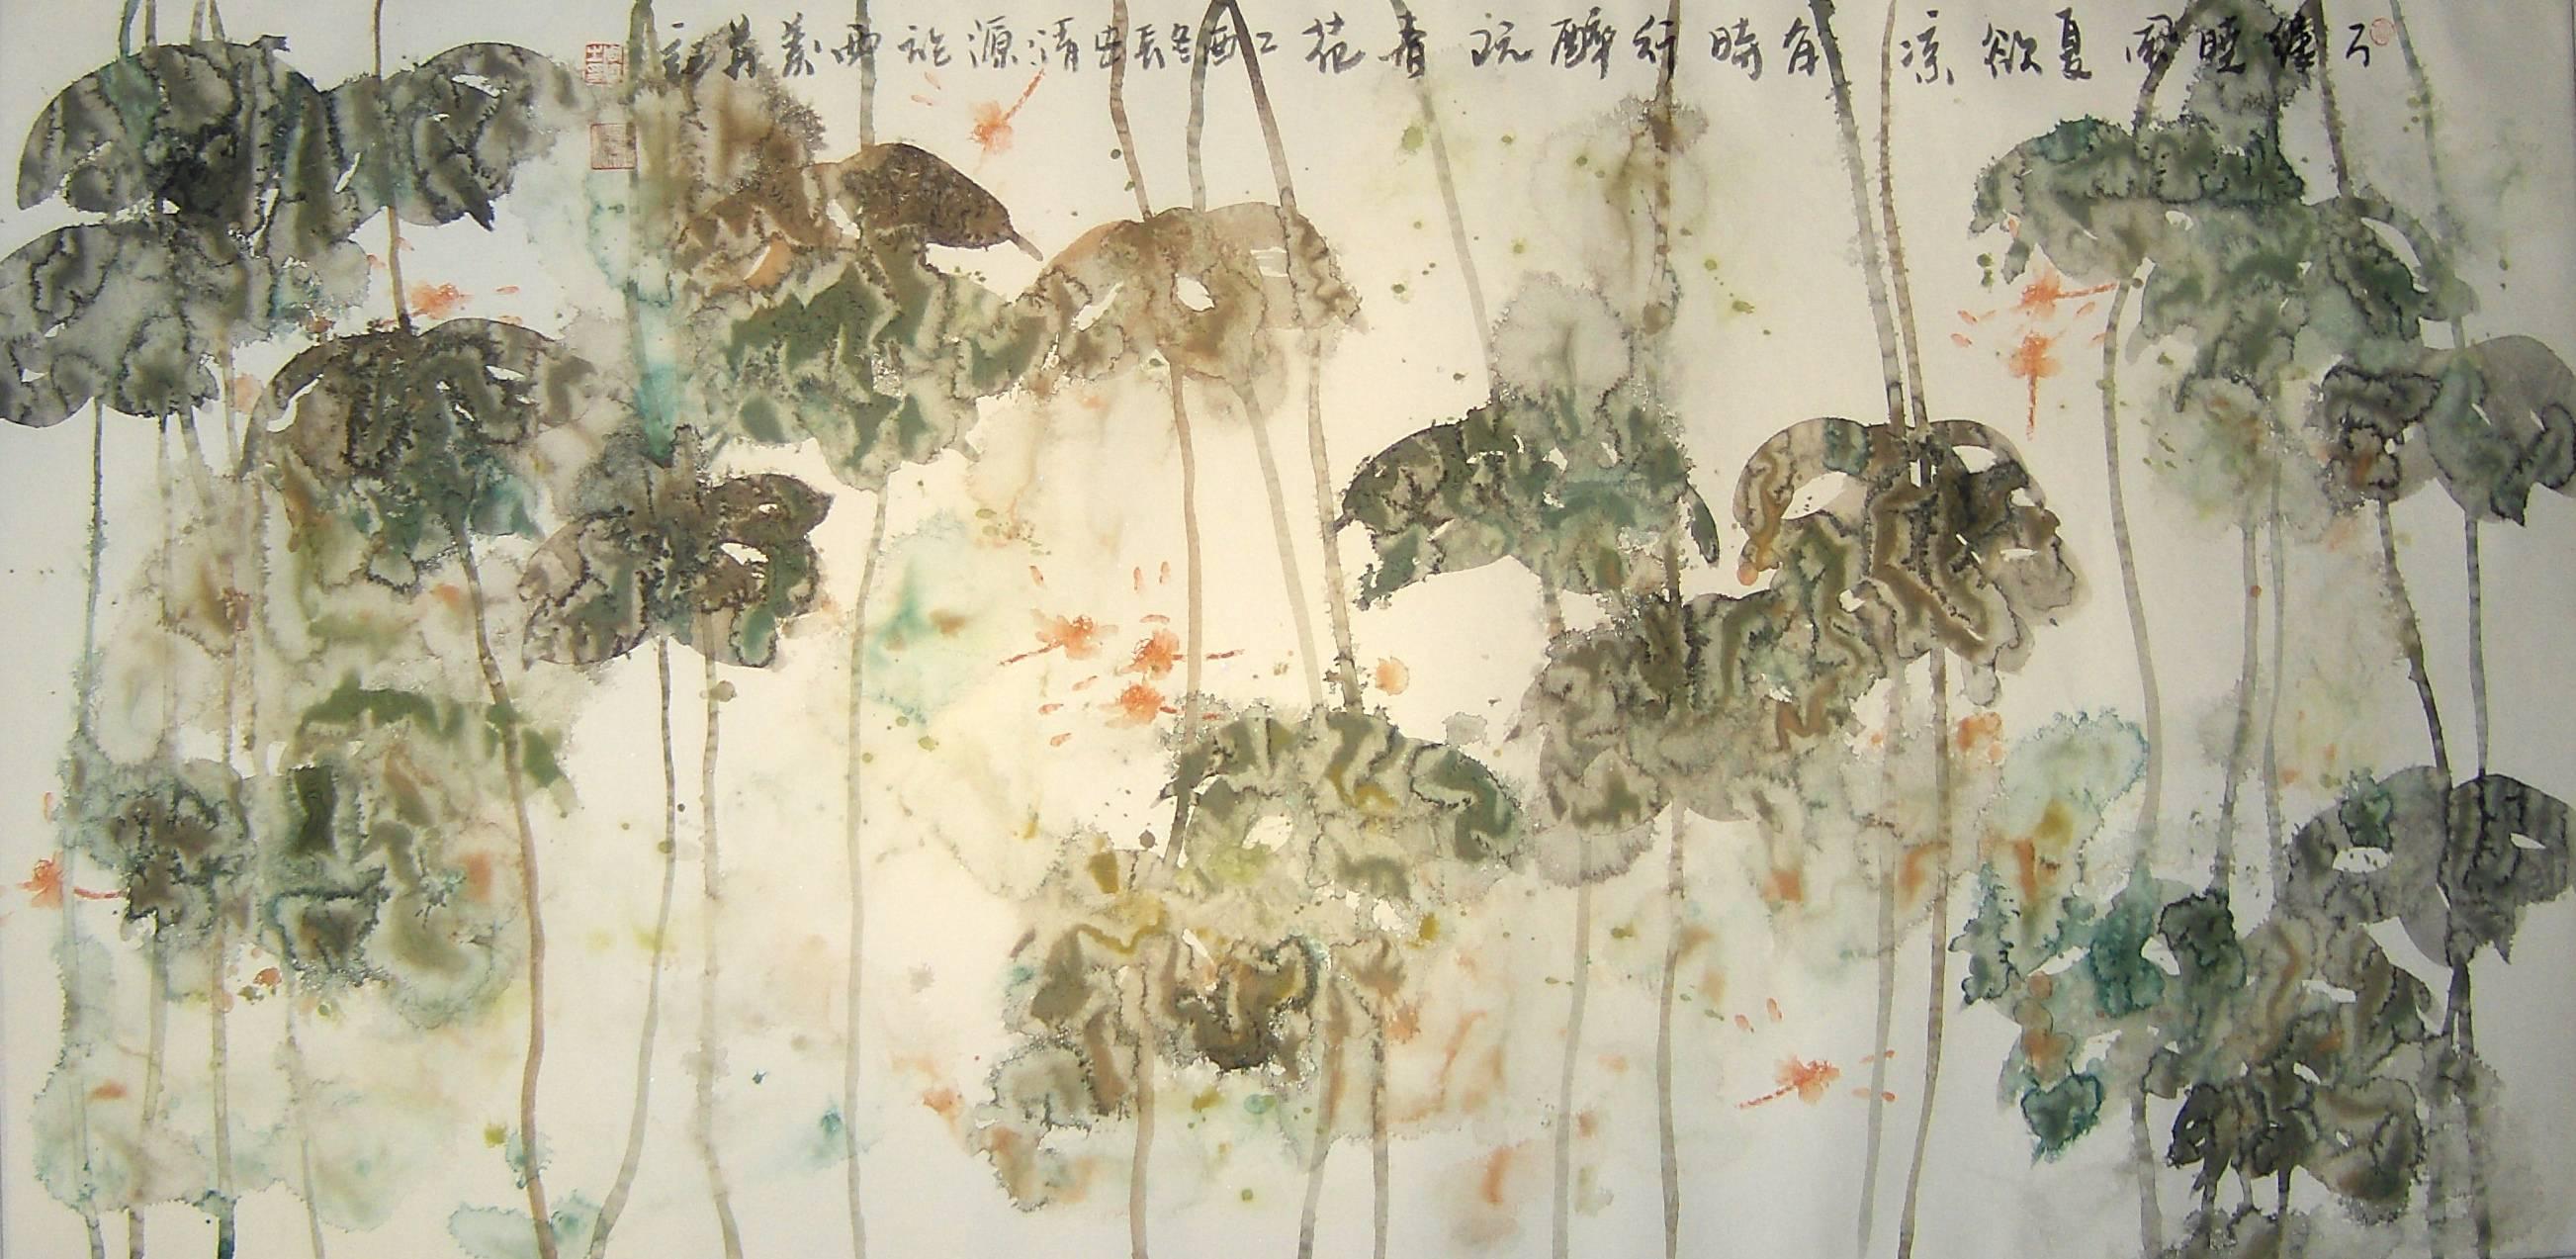 Zhou Xiao Abstract Drawing - Dragonfly Series #15